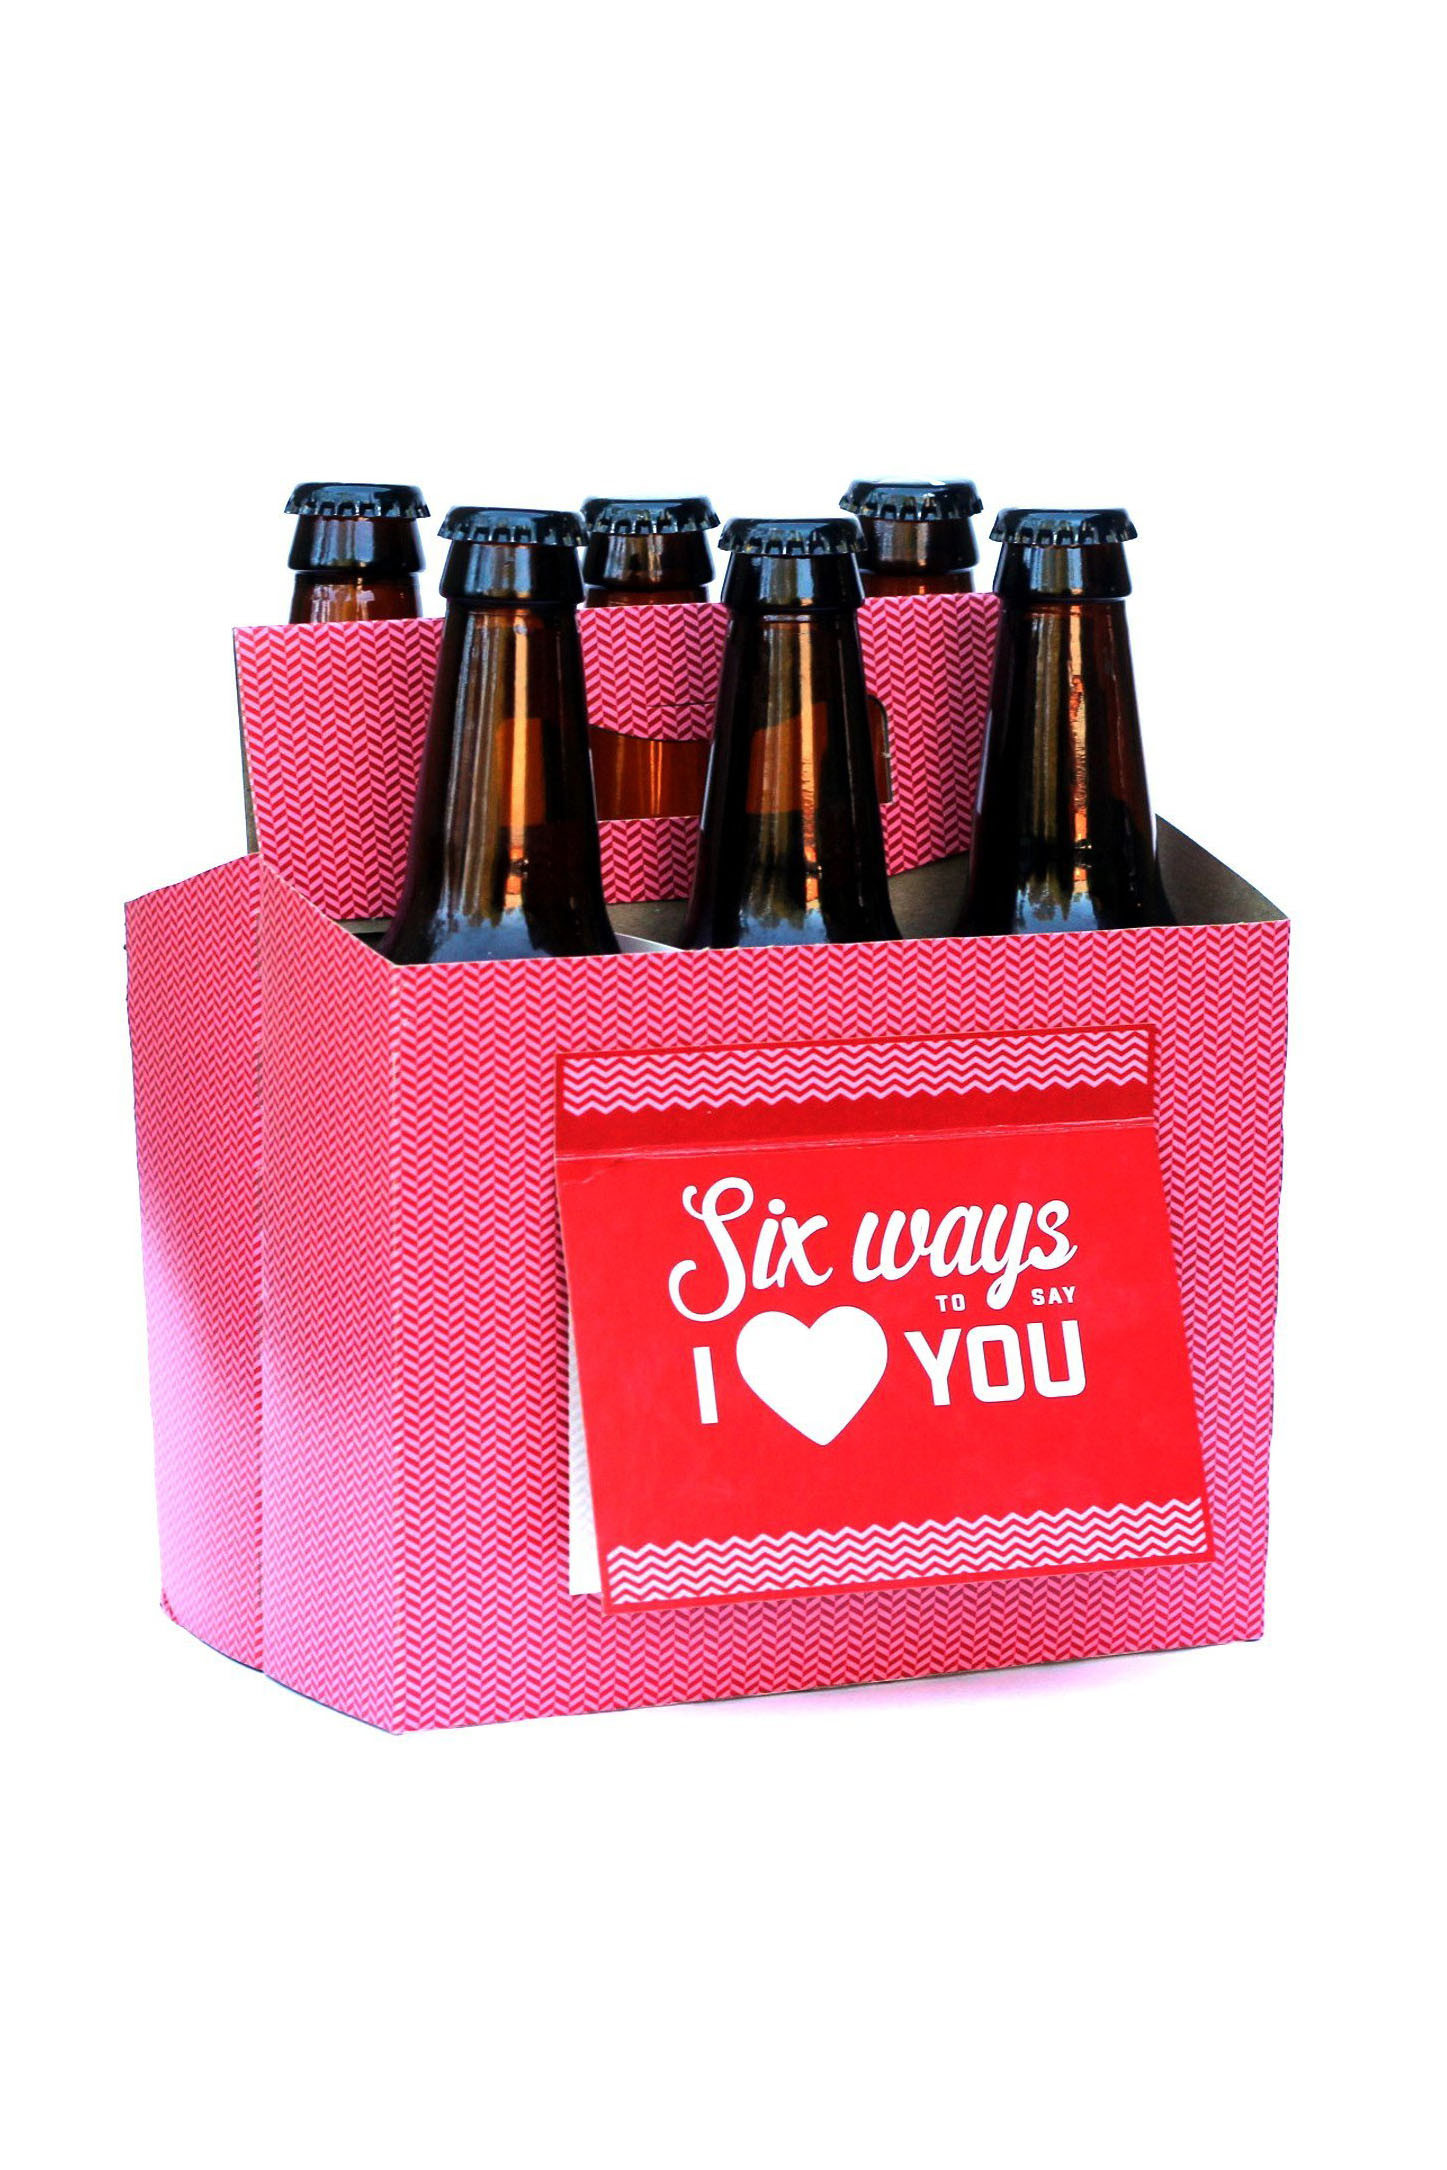 Valentines Gift Ideas For New Boyfriend
 Beer Gift Ideas For Him